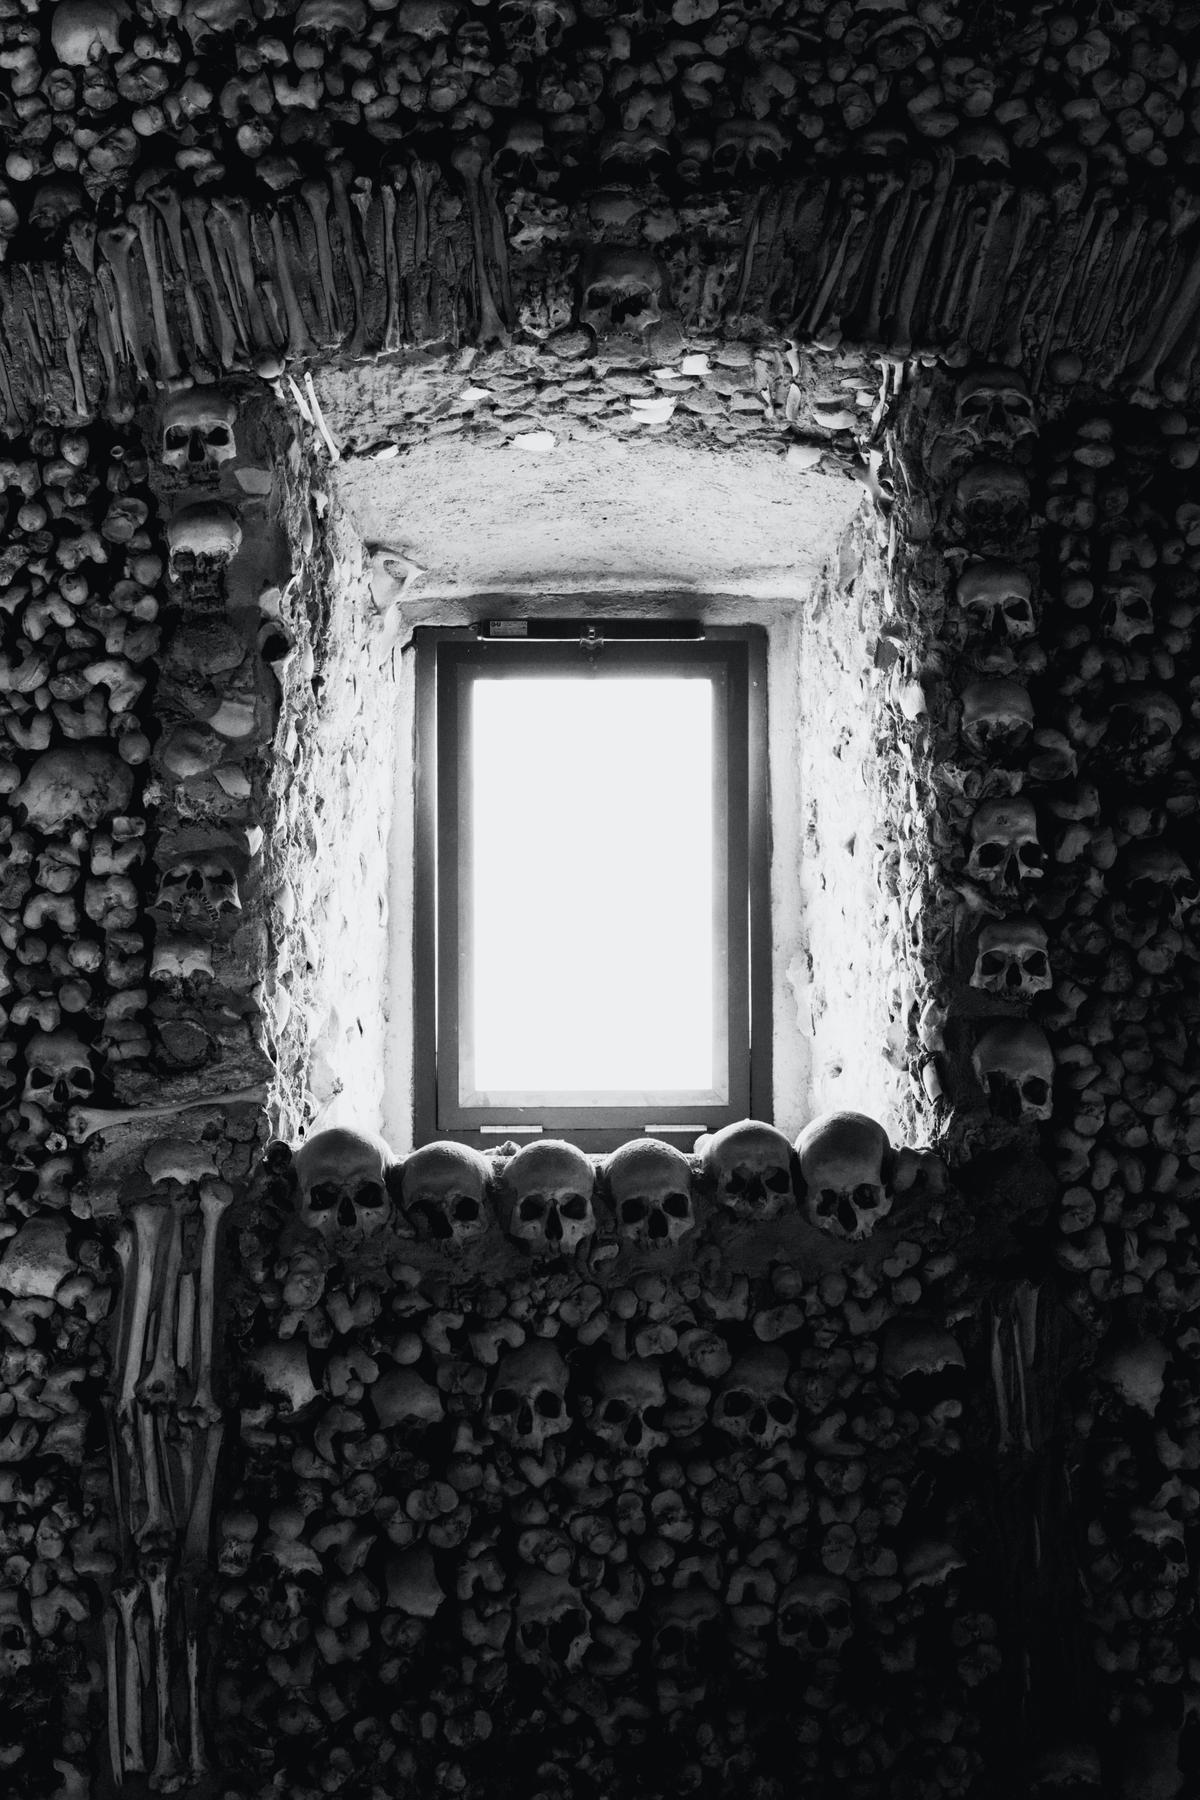 Although sinister in appearance, the Chapel of the Bones was meant for reflection on the transient nature of earthly life. (Miguel Alcantara/Unsplash)